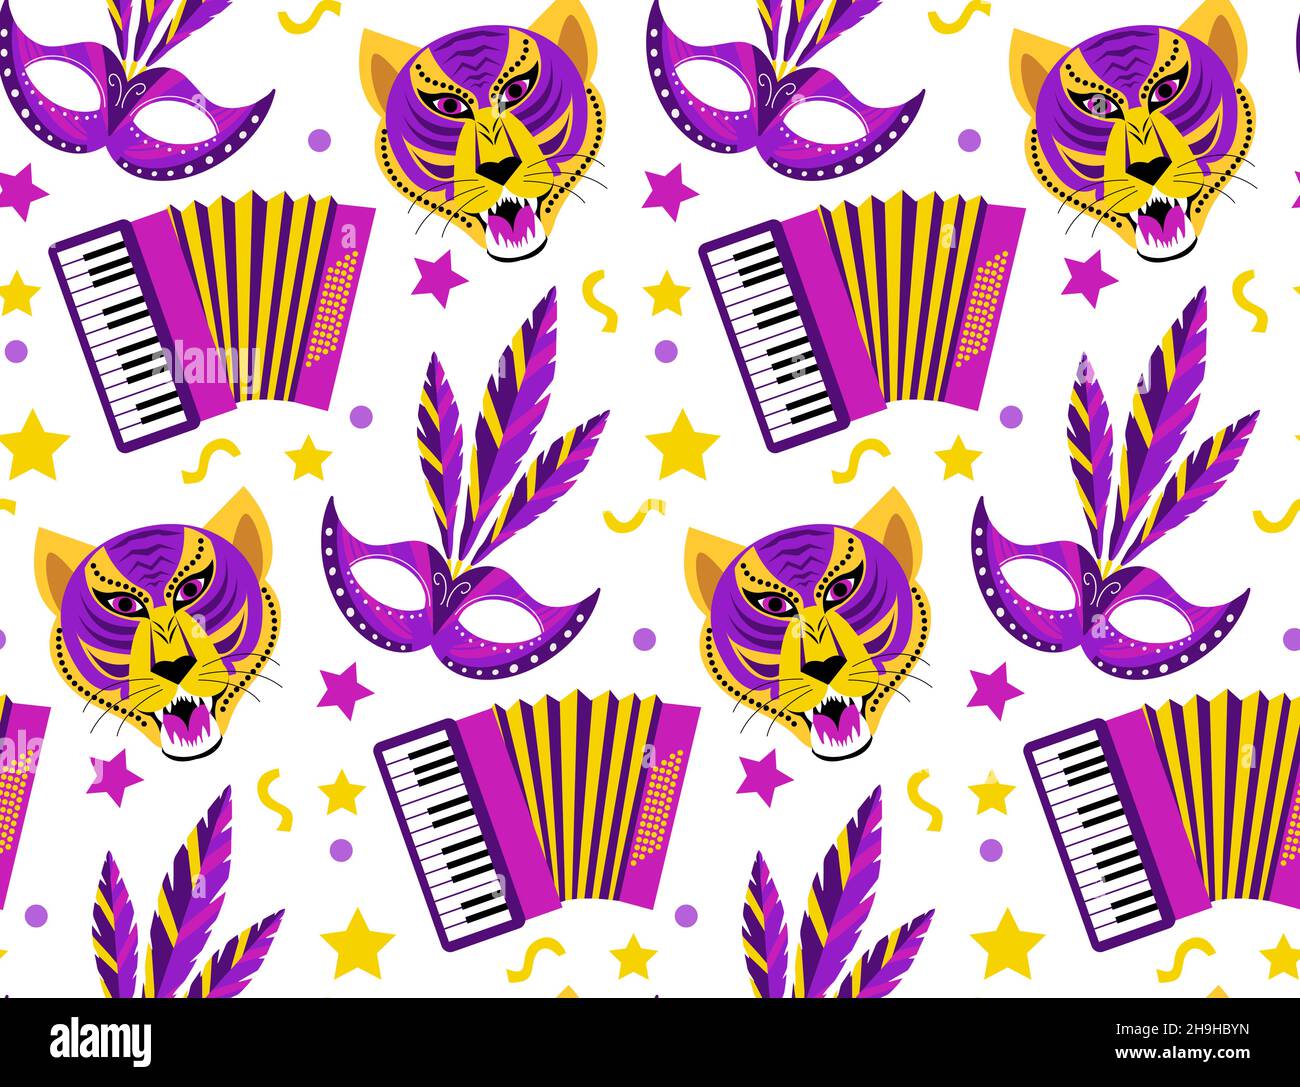 Barranquilla Carnival seamless pattern. Colombian carnaval party endless texture, background, wallpaper. Vector illustration Stock Vector